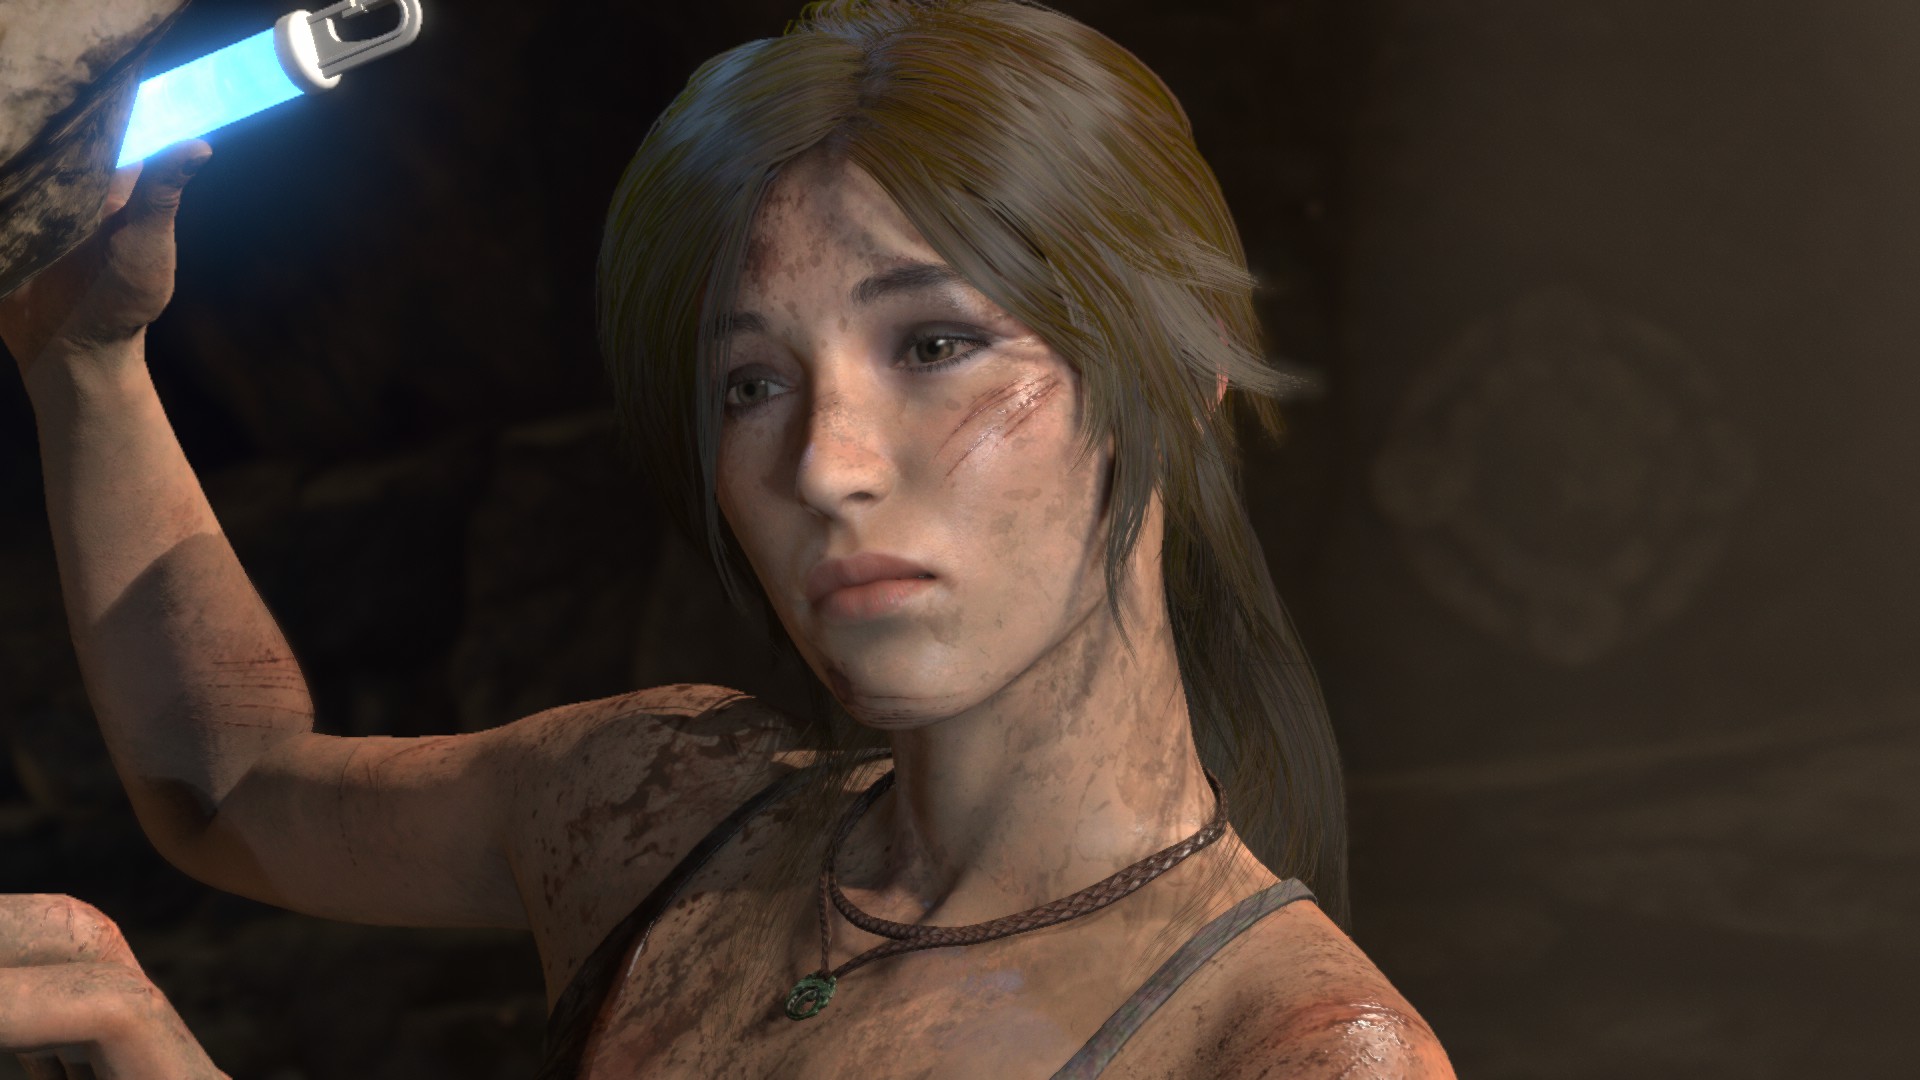 General 1920x1080 Rise of the Tomb Raider looking into the distance scars brown eyes brunette necklace sad pink lipstick Lara Croft (Tomb Raider) video games PC gaming blue light screen shot